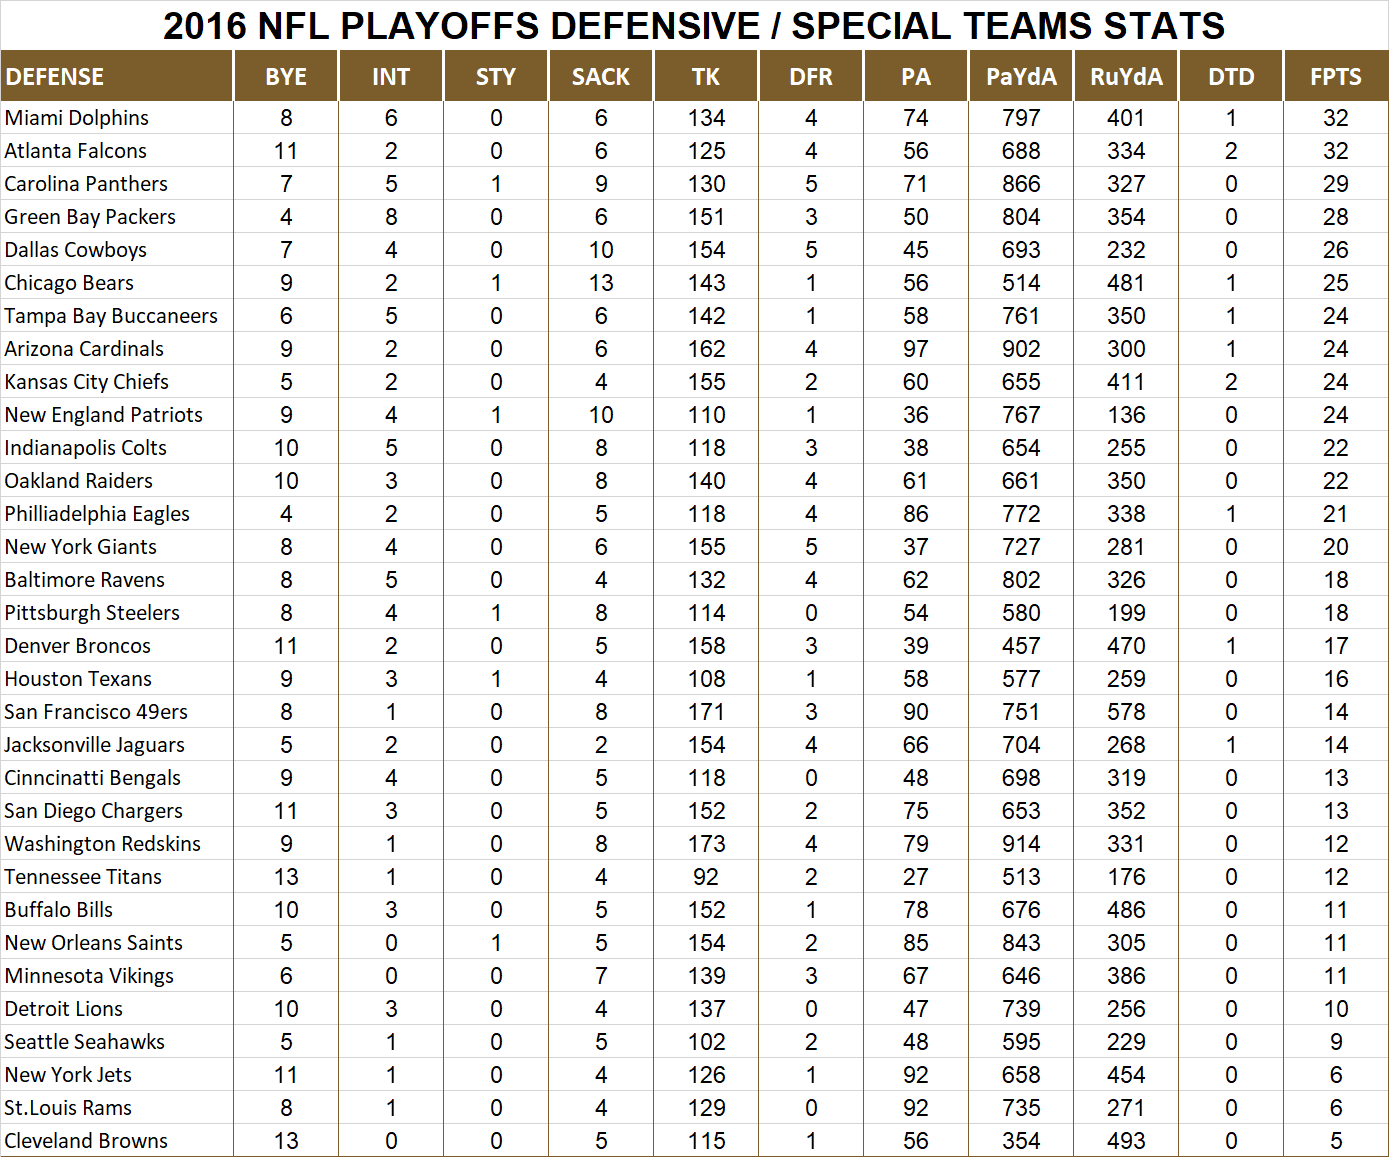 2016 National Football League Pool Playoff Player Defensive Stats